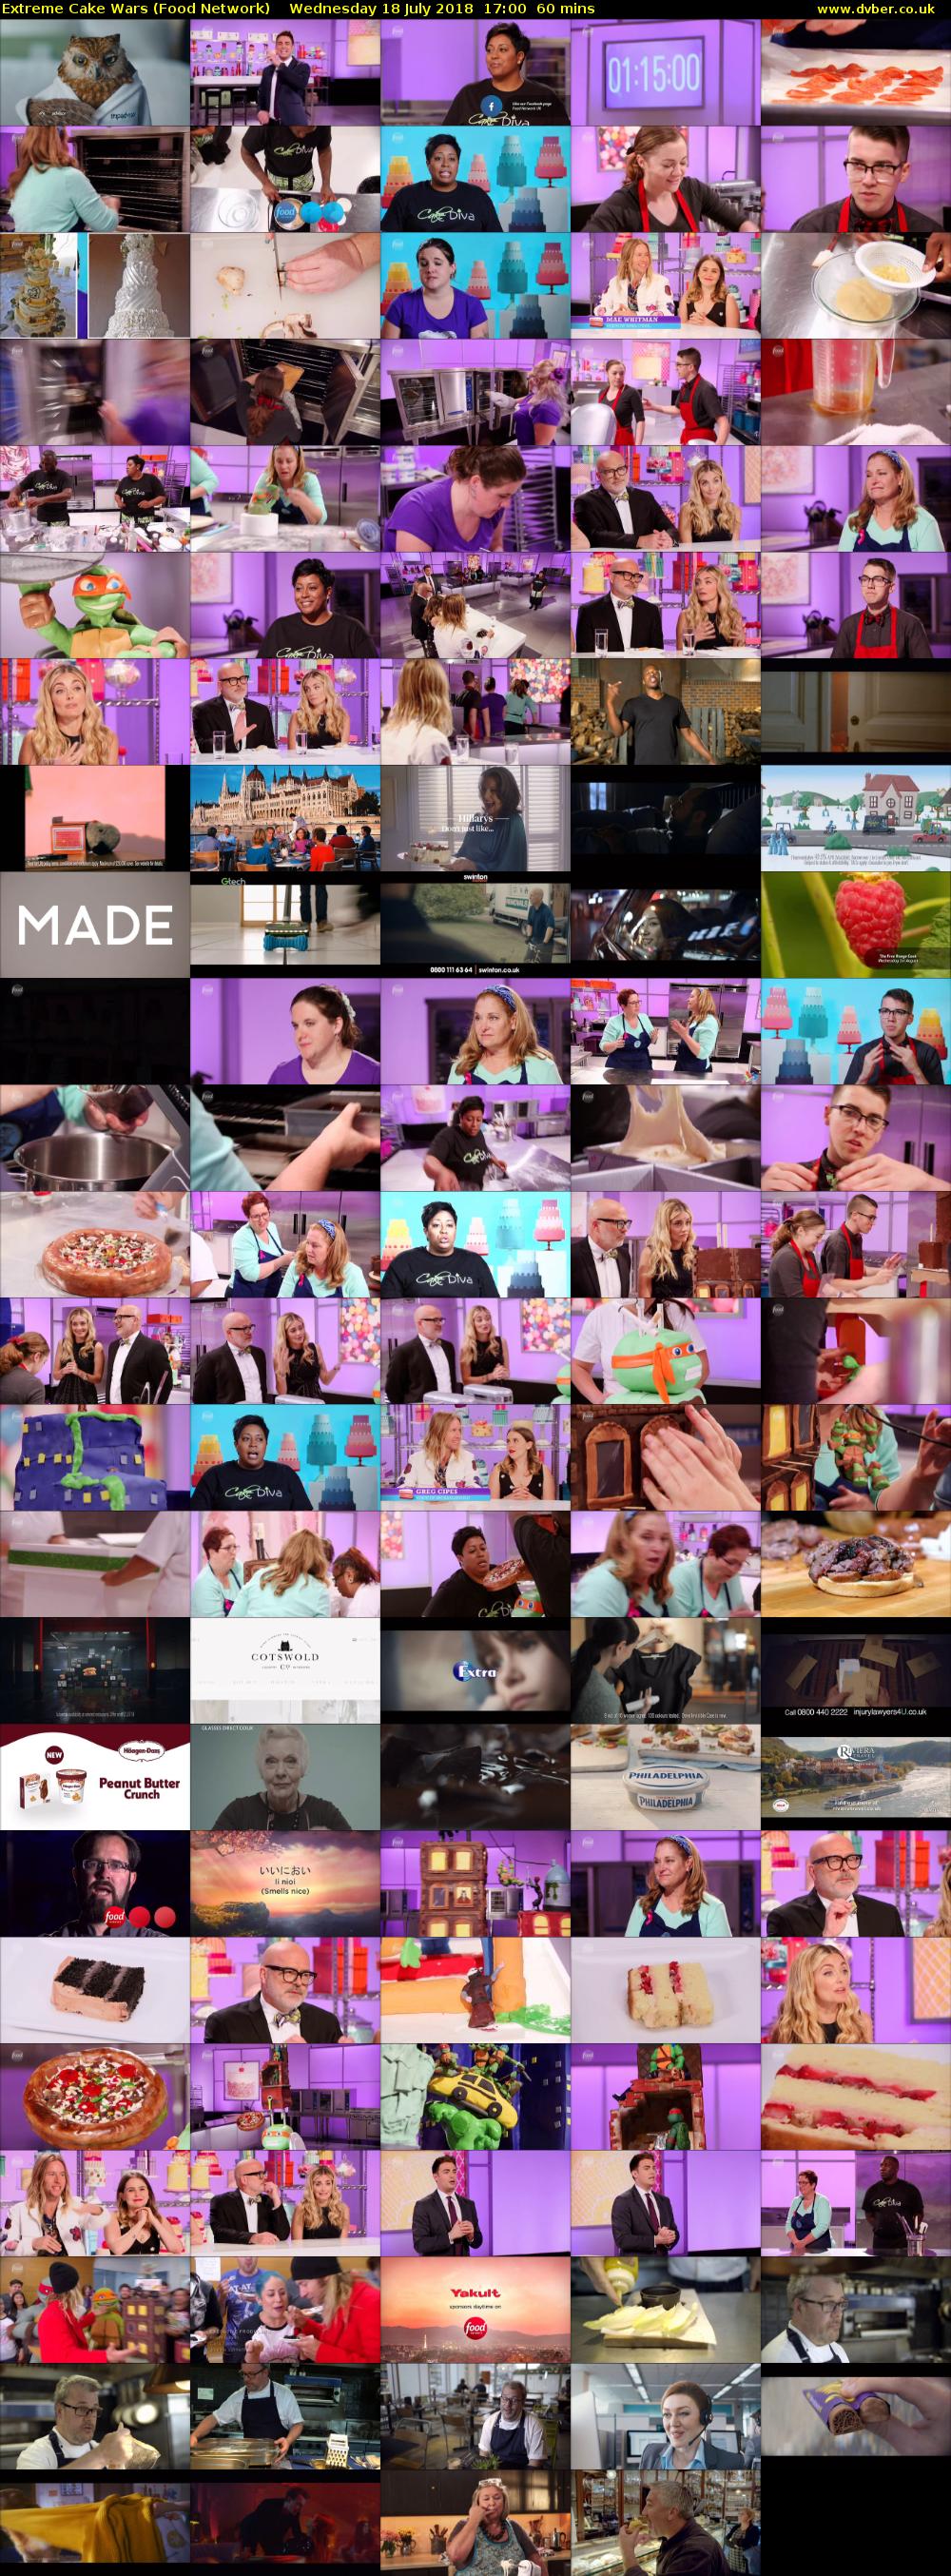 Extreme Cake Wars (Food Network) Wednesday 18 July 2018 17:00 - 18:00